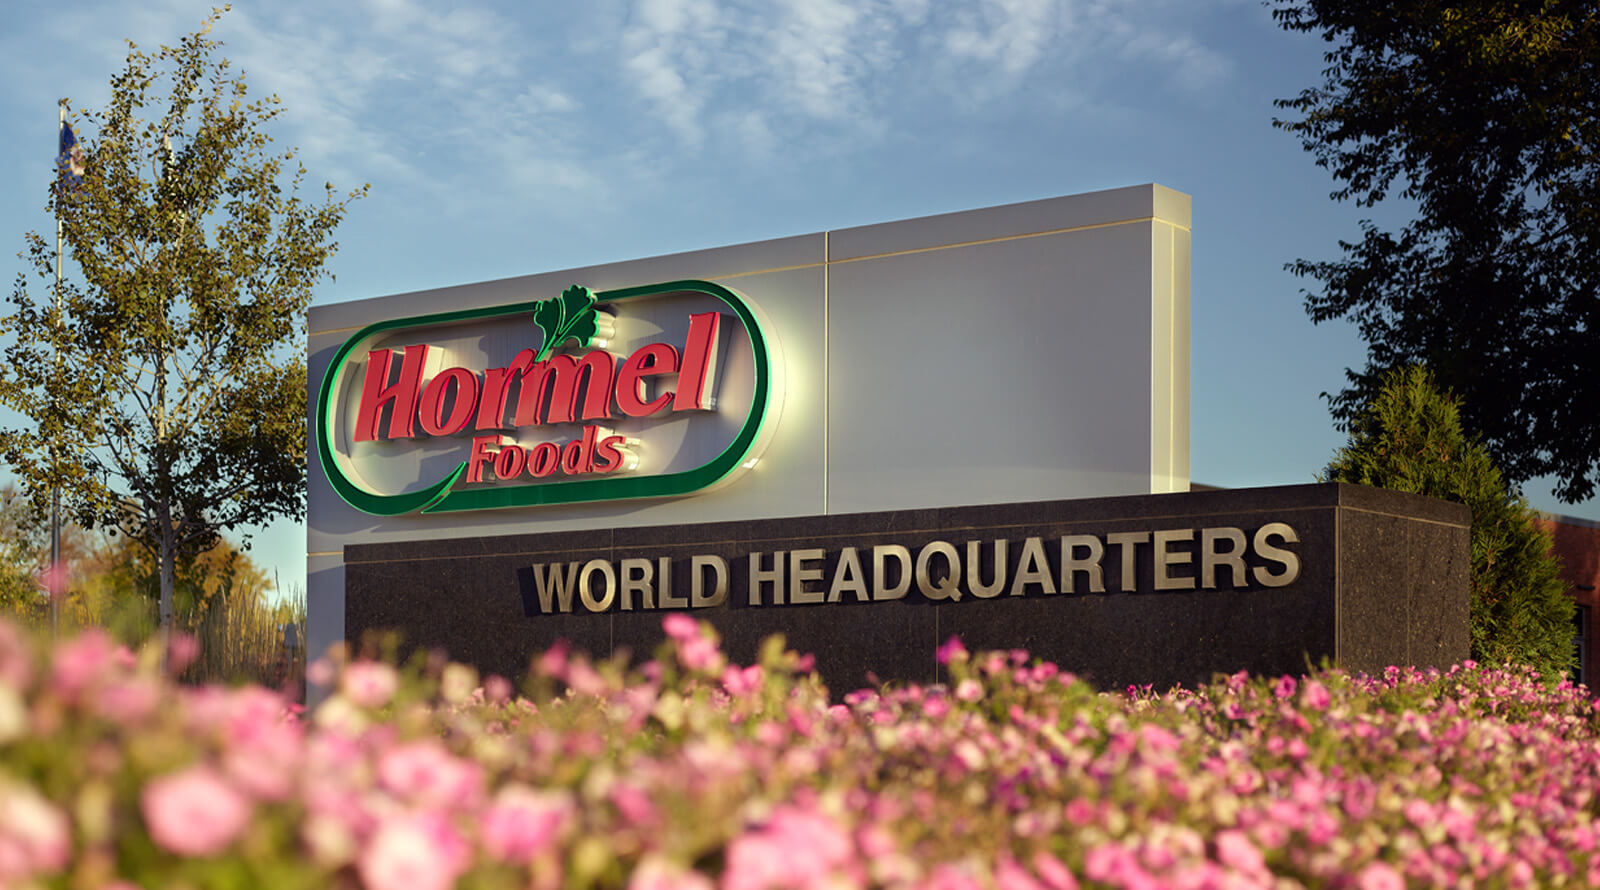 Hormel Foods headquarters sign with pink flowers in foreground